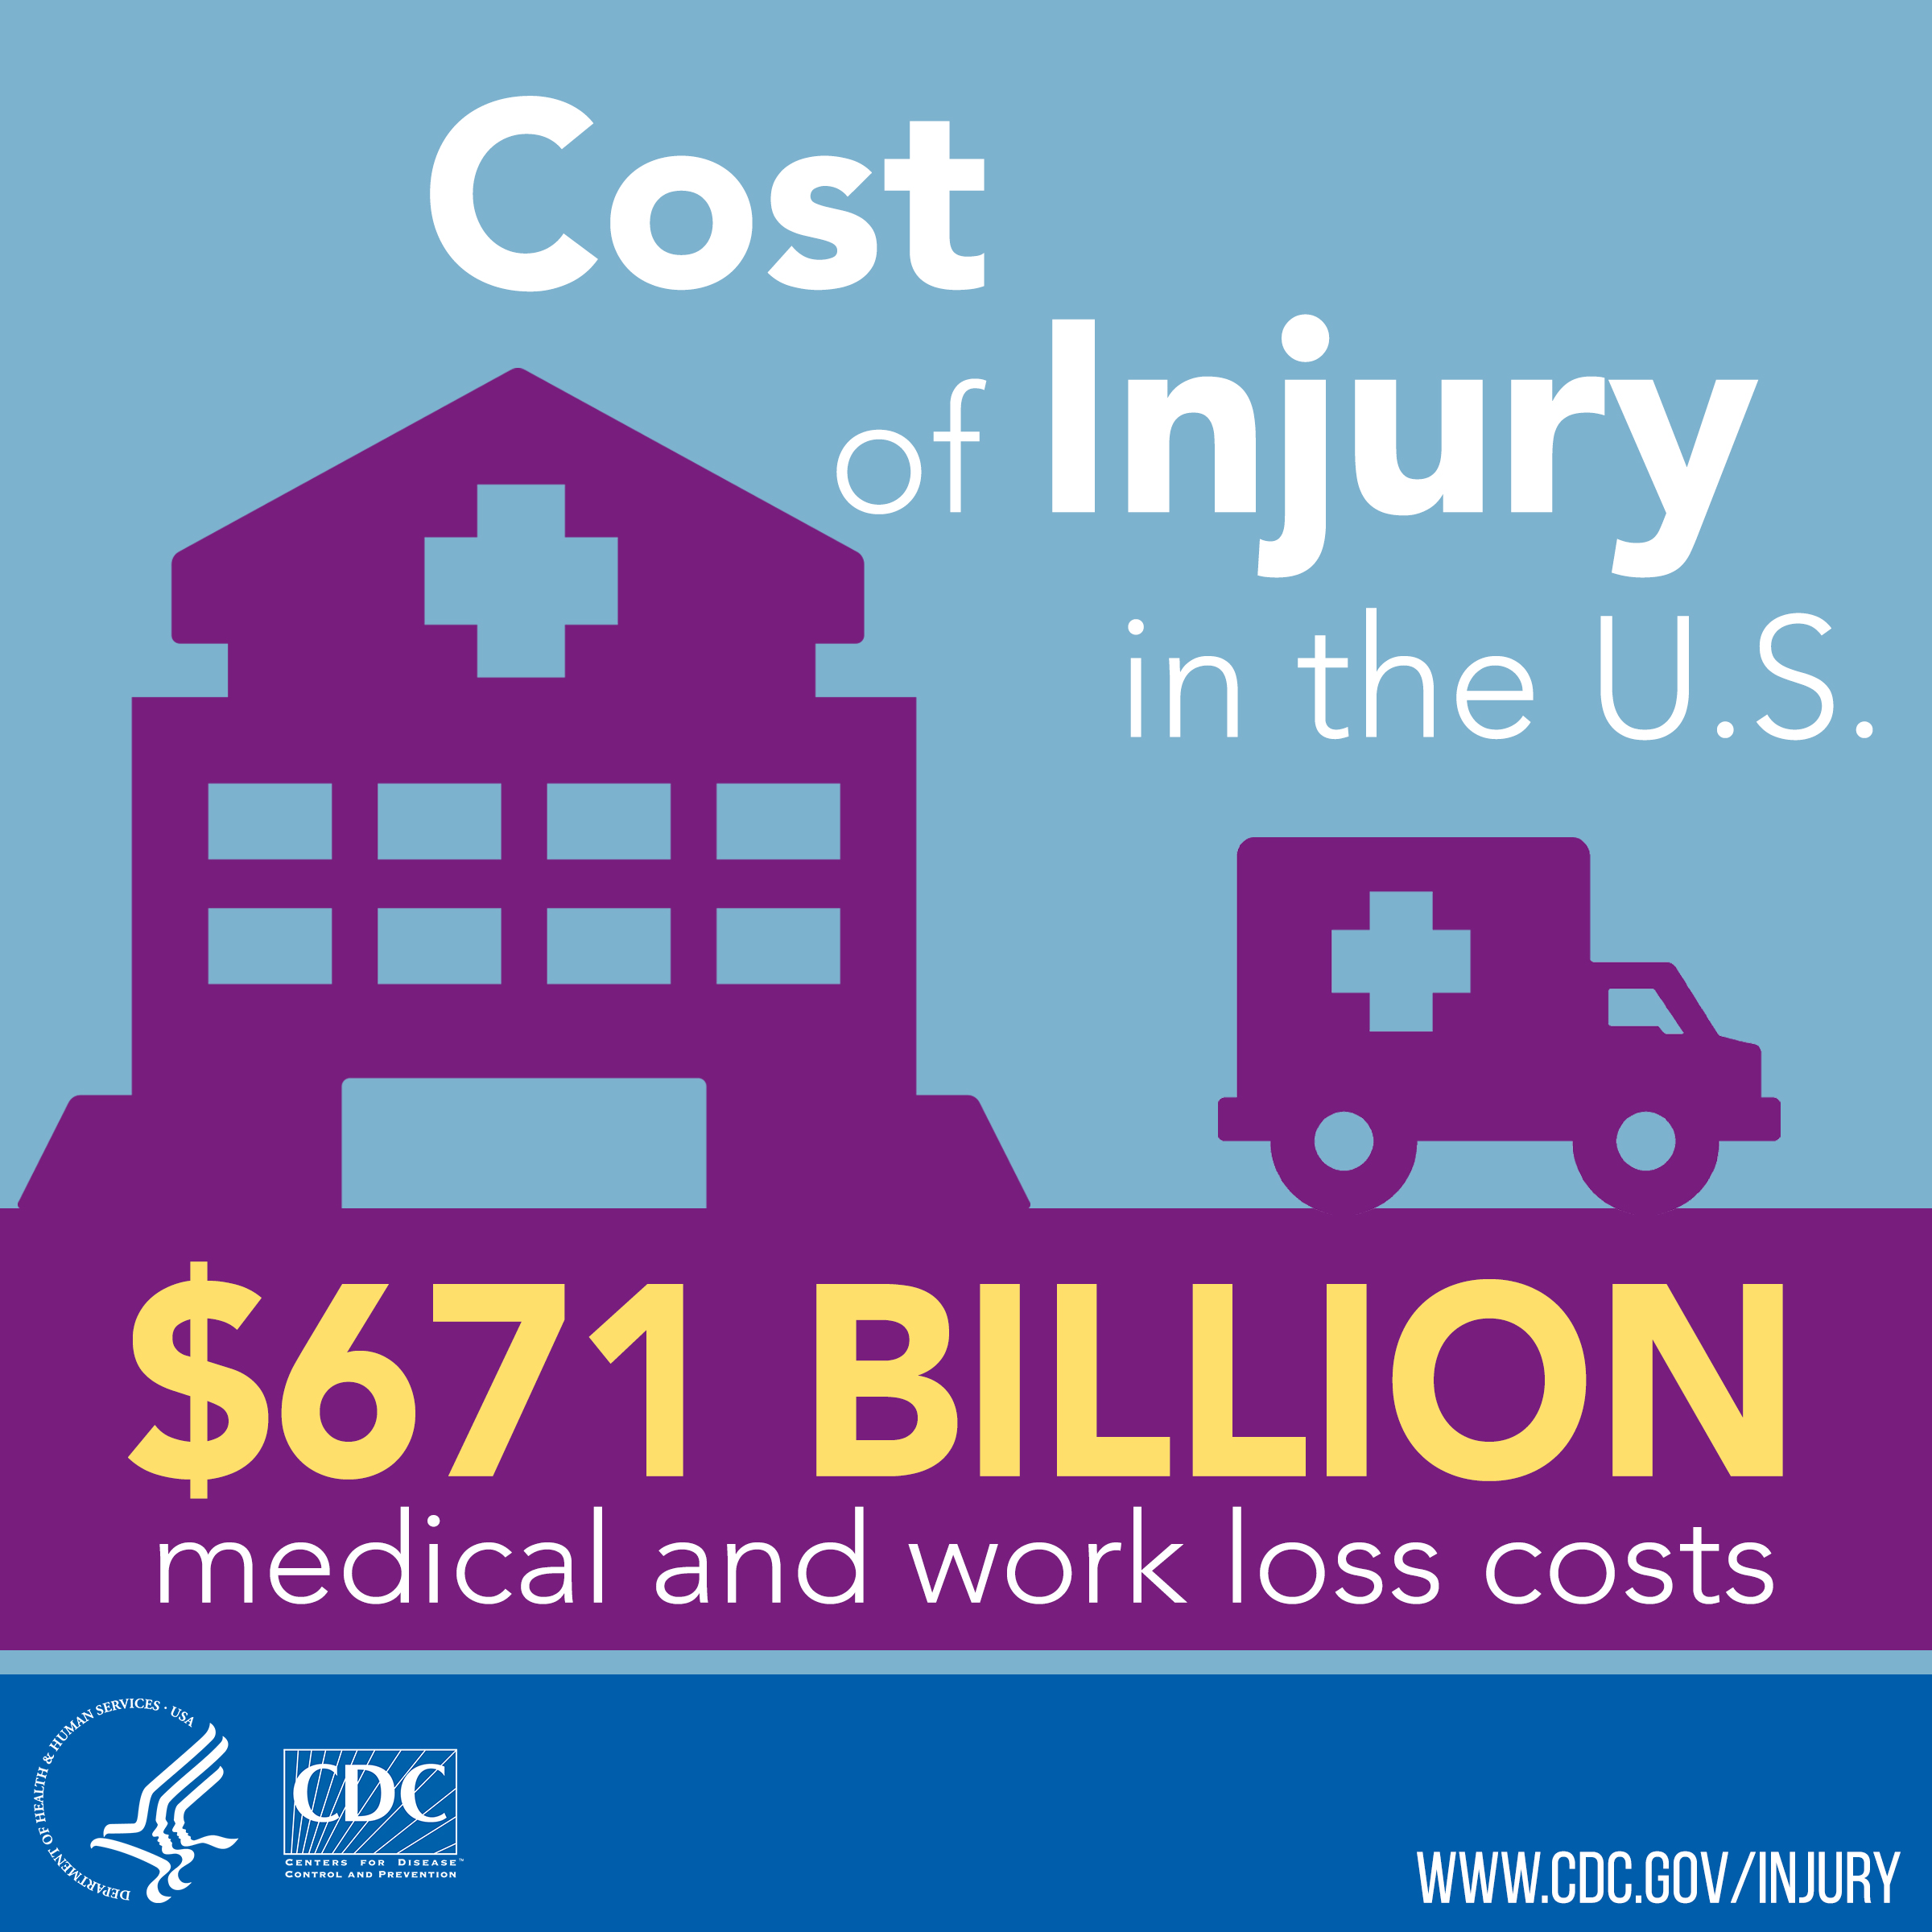 Cost of injury in the U.S.